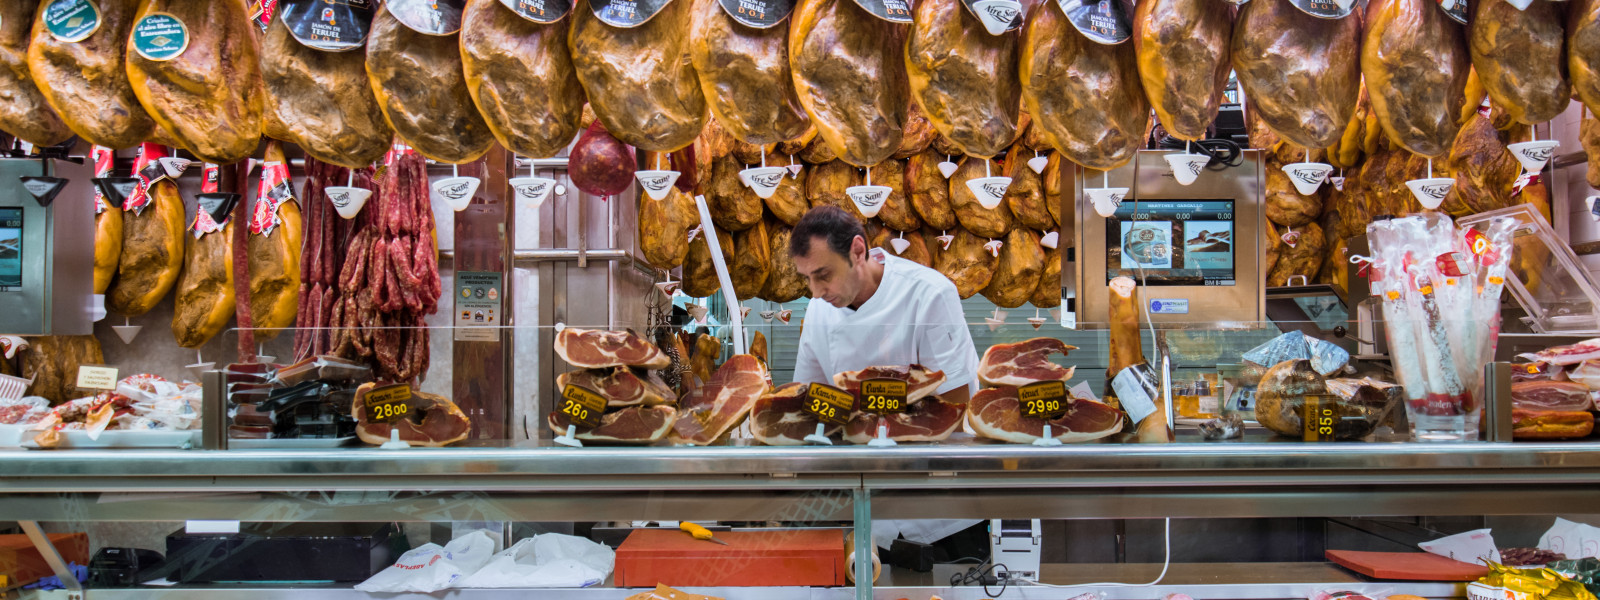 A person behind the counter of a well-stocked jamon shop appears to be immersed in their work